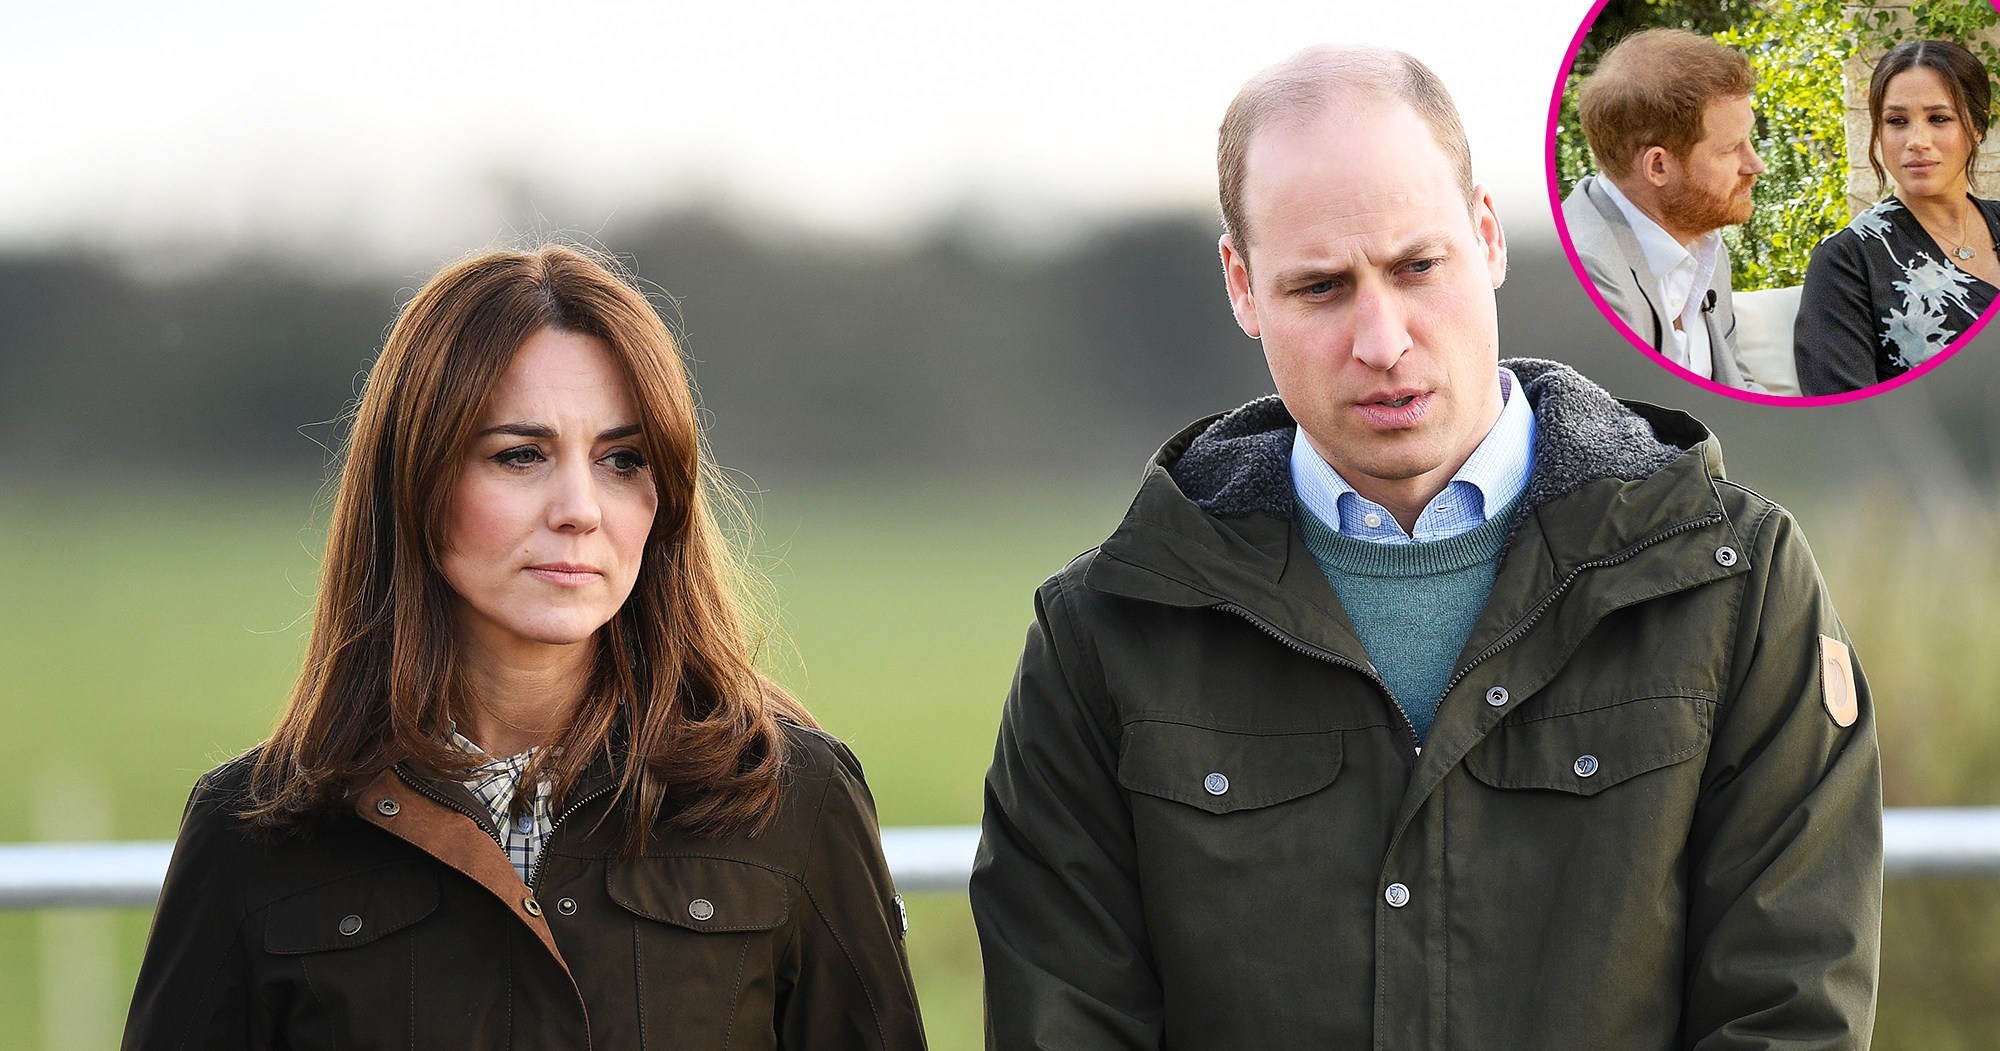 Prince William Defends Royal Family After Harry, Meghan's Bombshell Interview